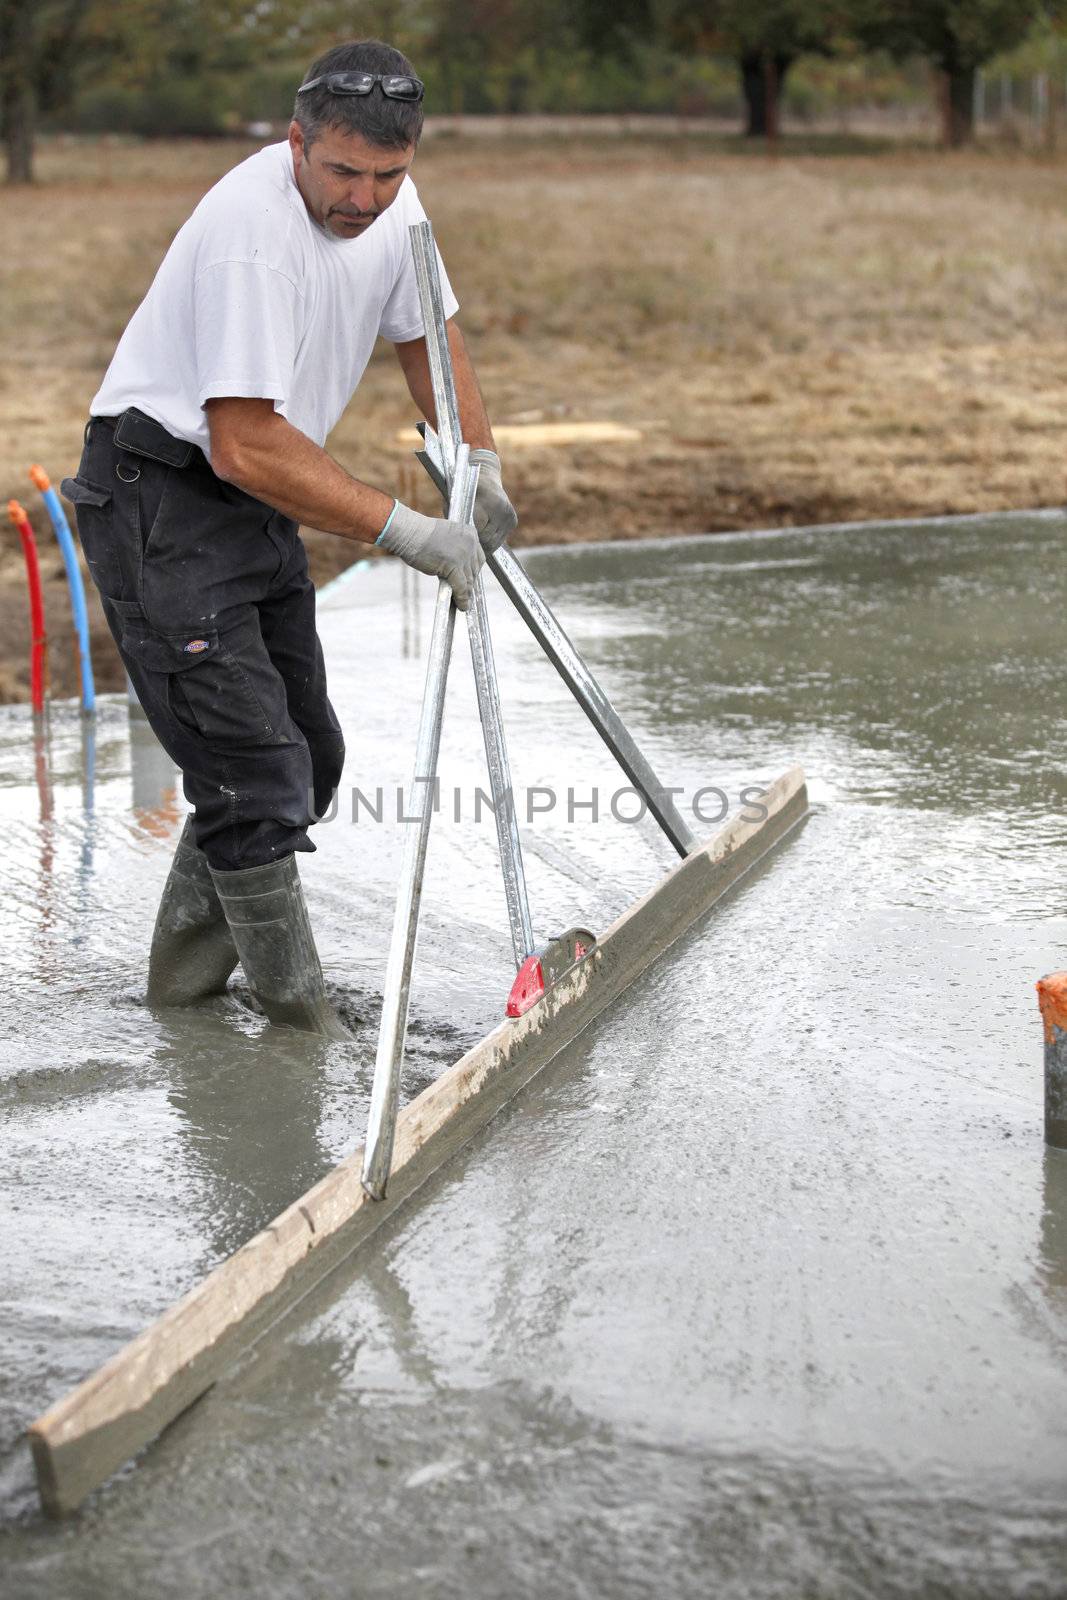 Mason smoothing concrete by phovoir